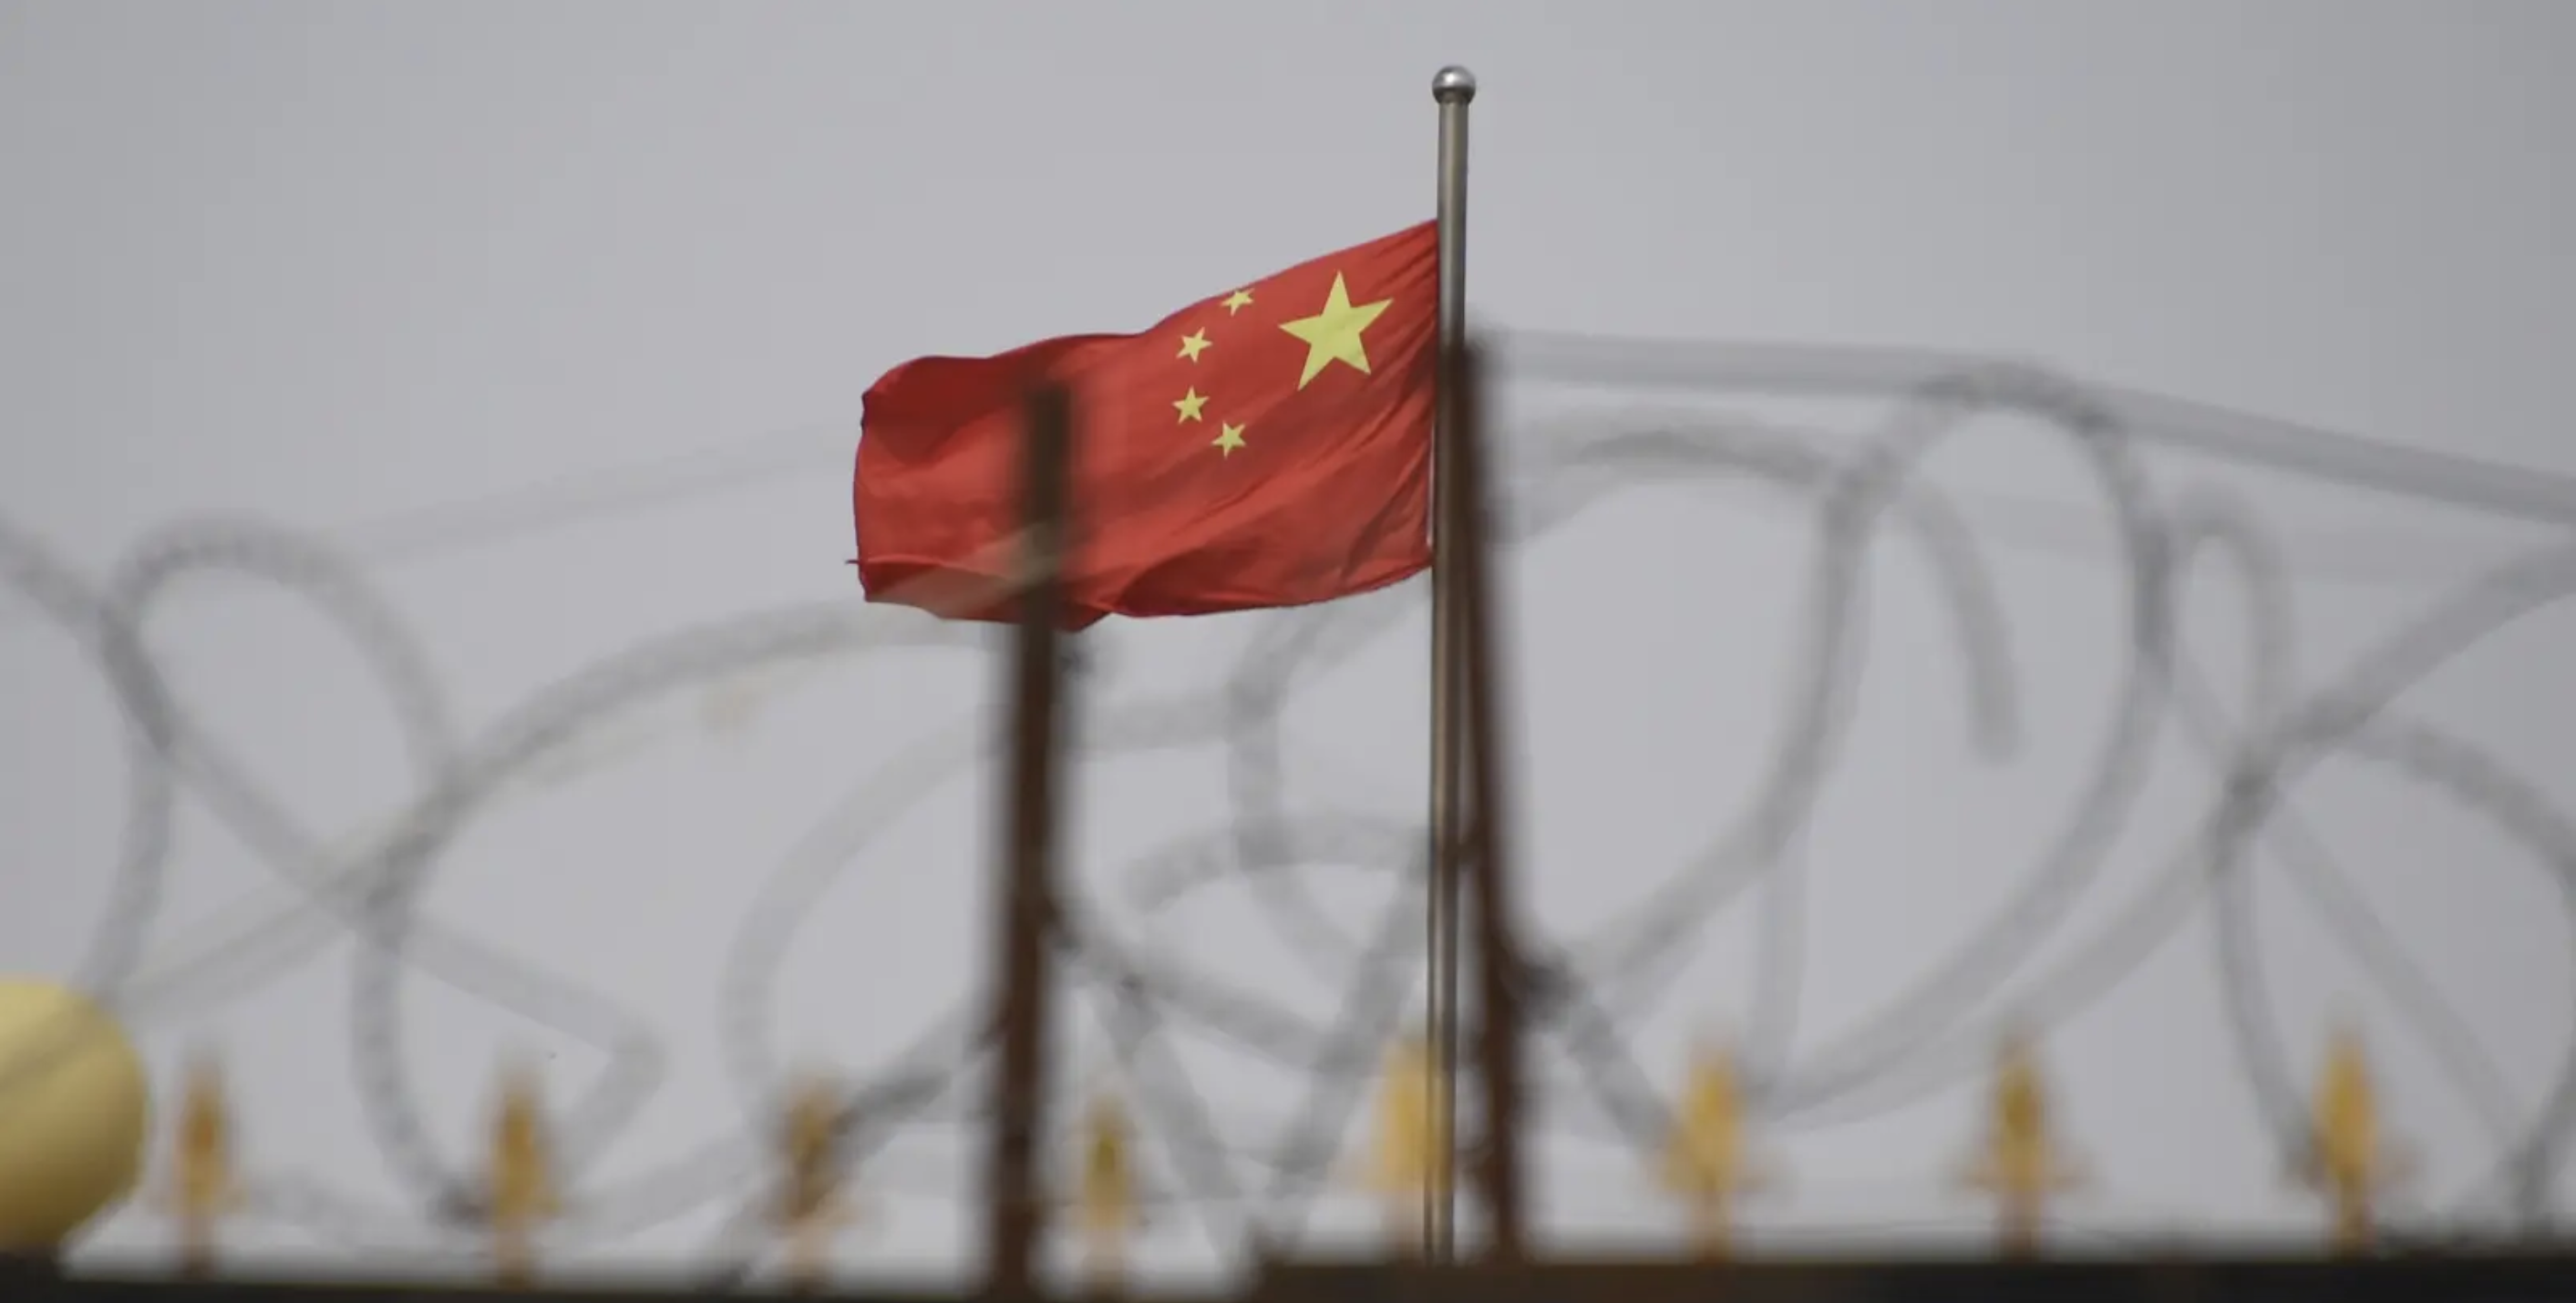 The Chinese flag is seen behind razor wire at a housing compound in Yangisar, south of Kashgar, in China's western Xinjiang region, June 4, 2019. Image by Greg Baker/Getty Images. China, 2019.